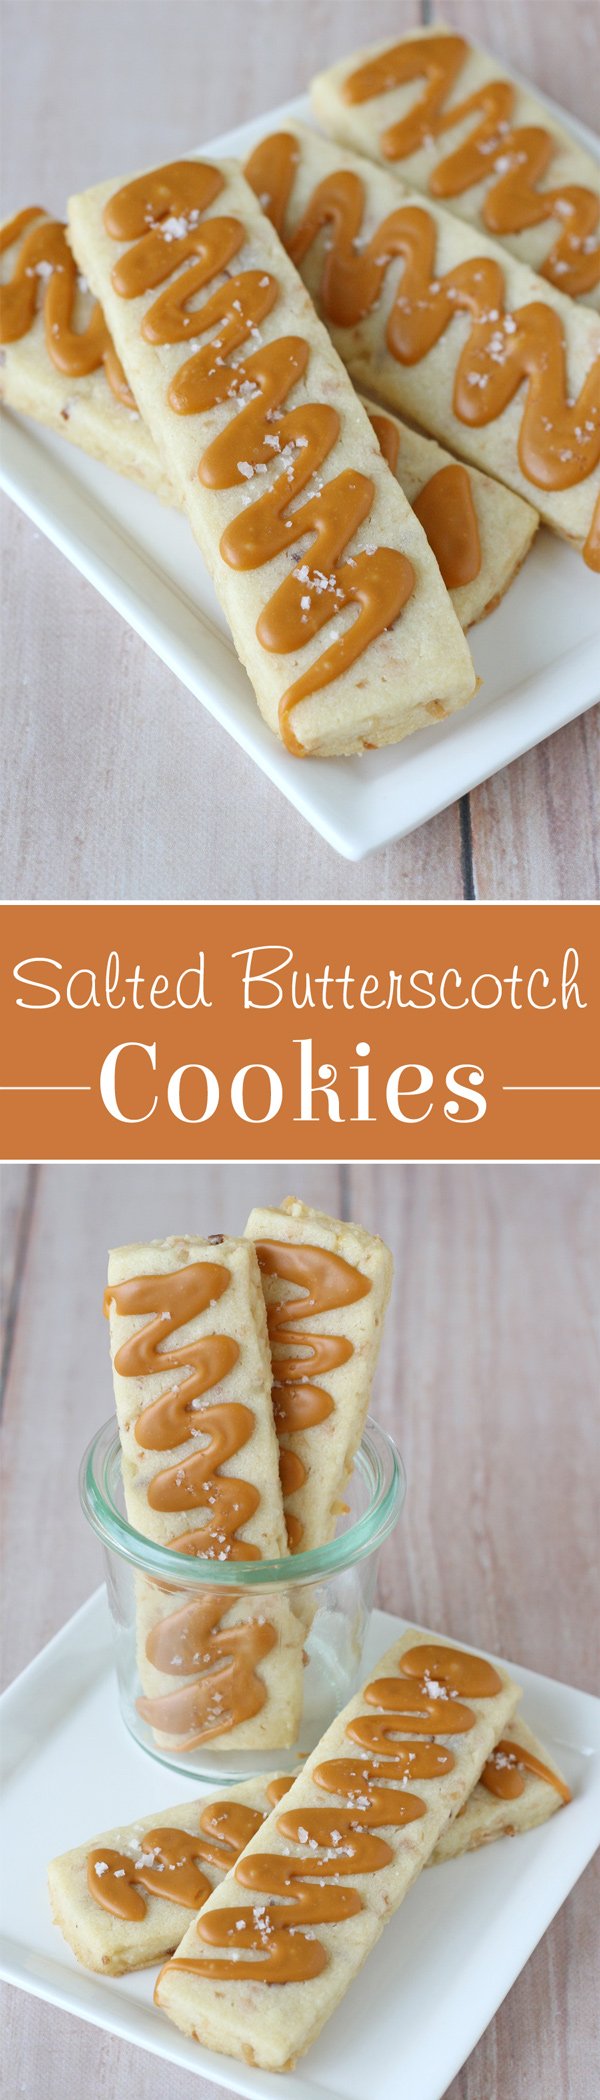 Sweet, salty, crispy, chewy, these amazing Salted Butterscotch Cookies will blow your mind! 